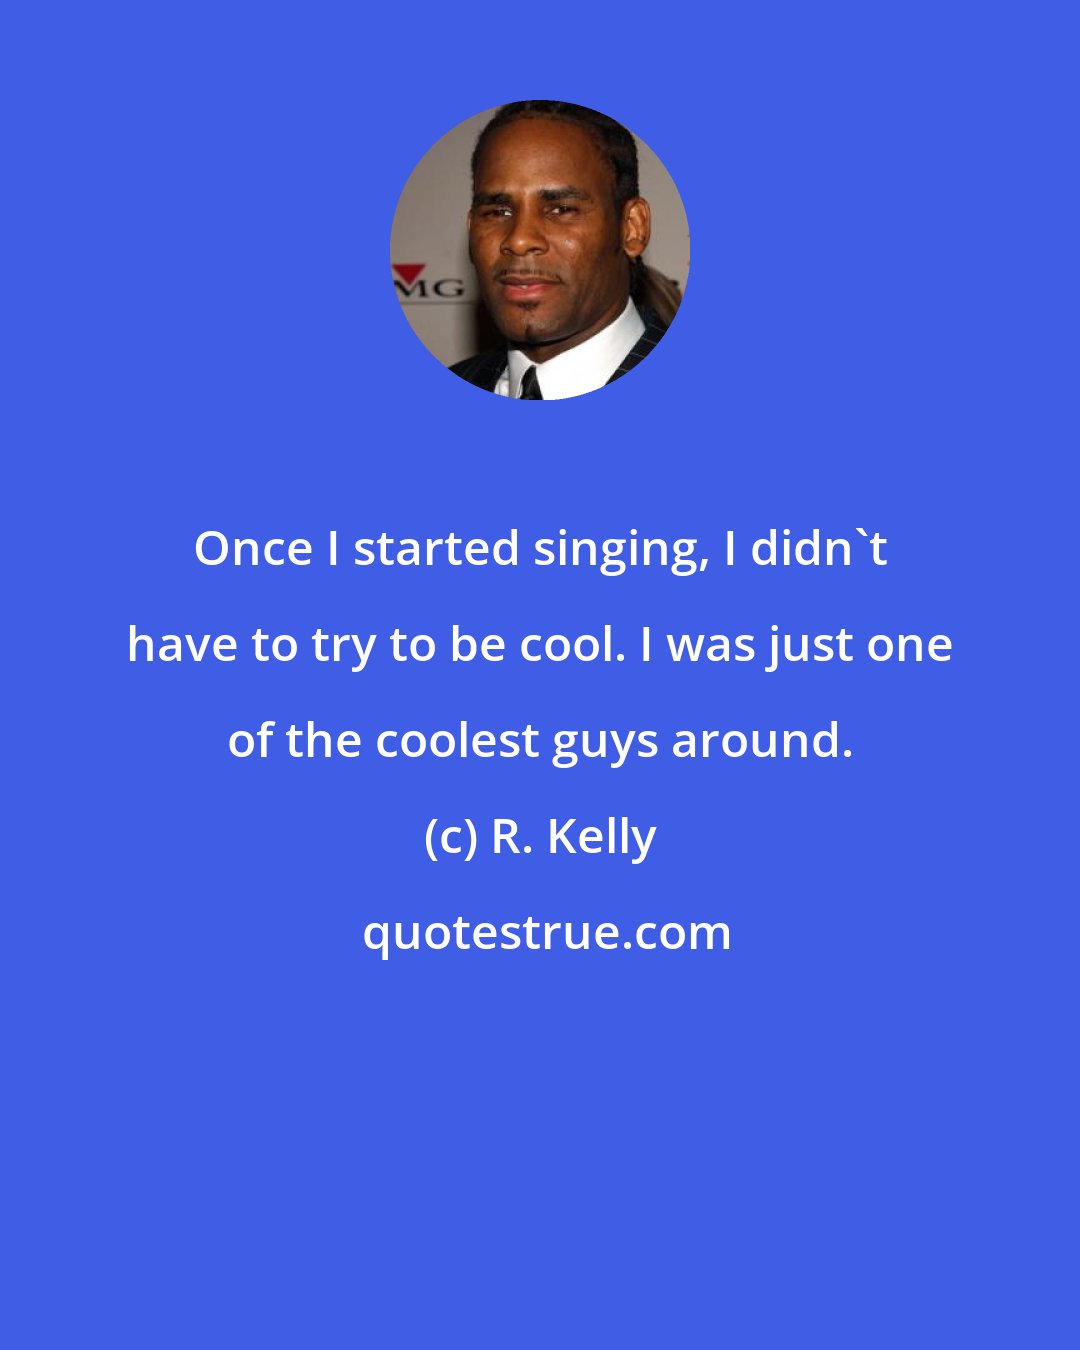 R. Kelly: Once I started singing, I didn't have to try to be cool. I was just one of the coolest guys around.